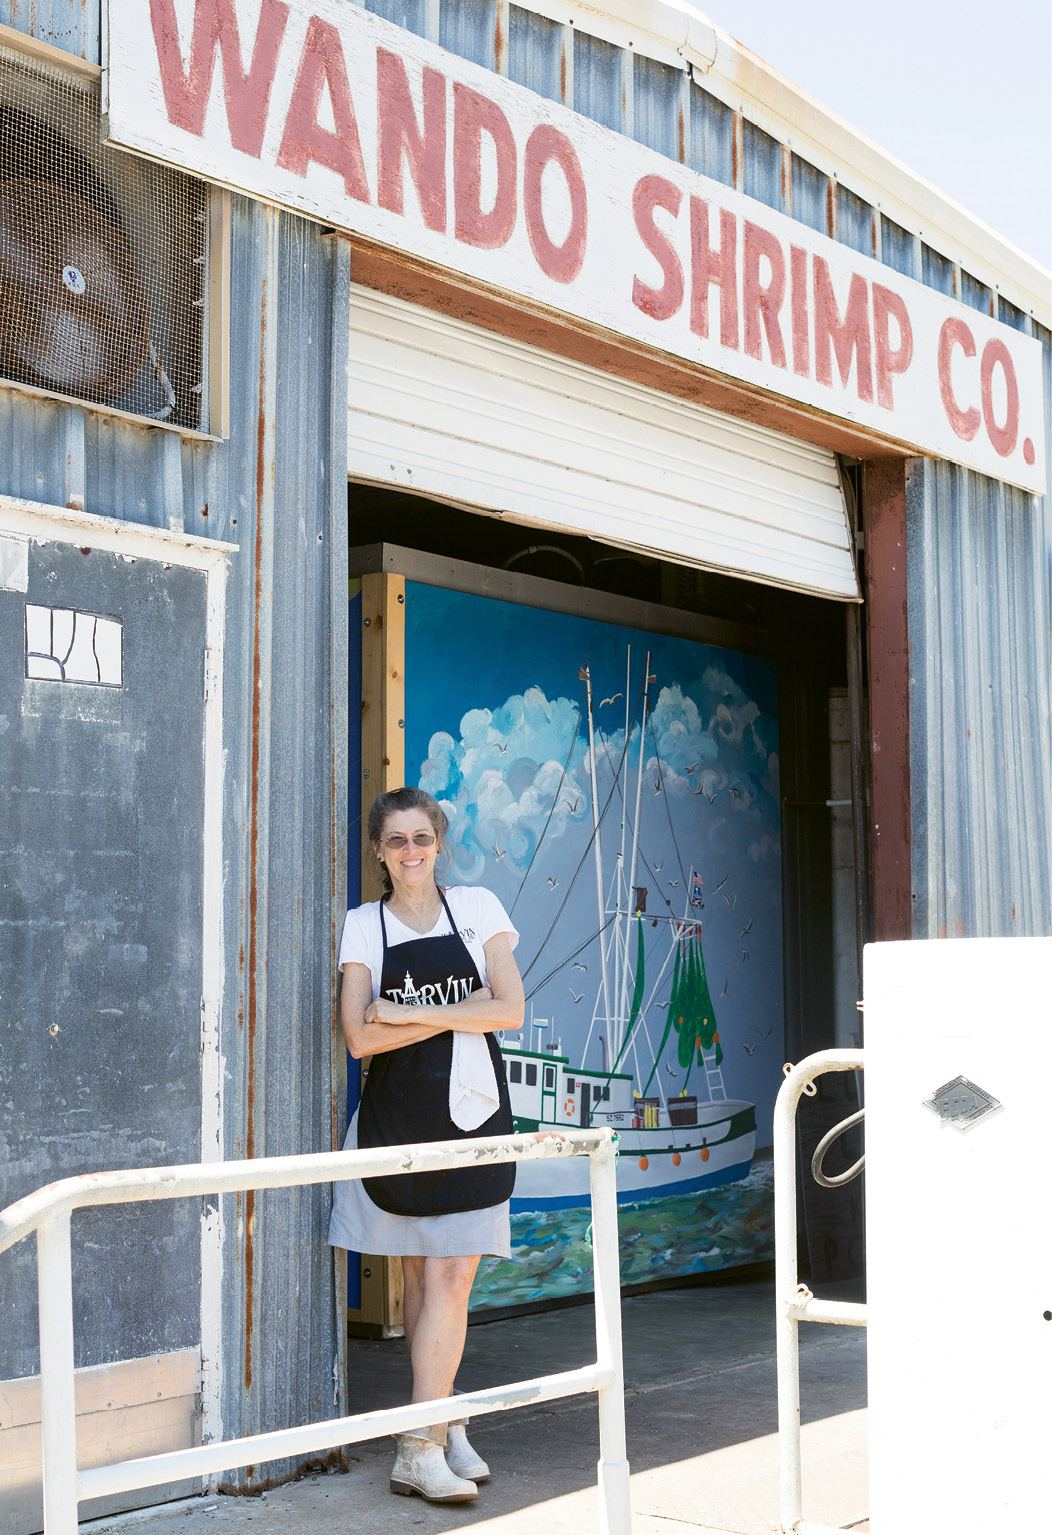 Cindy Tarvin opened Tarvin Seafood at Wando Dock with her family this spring.